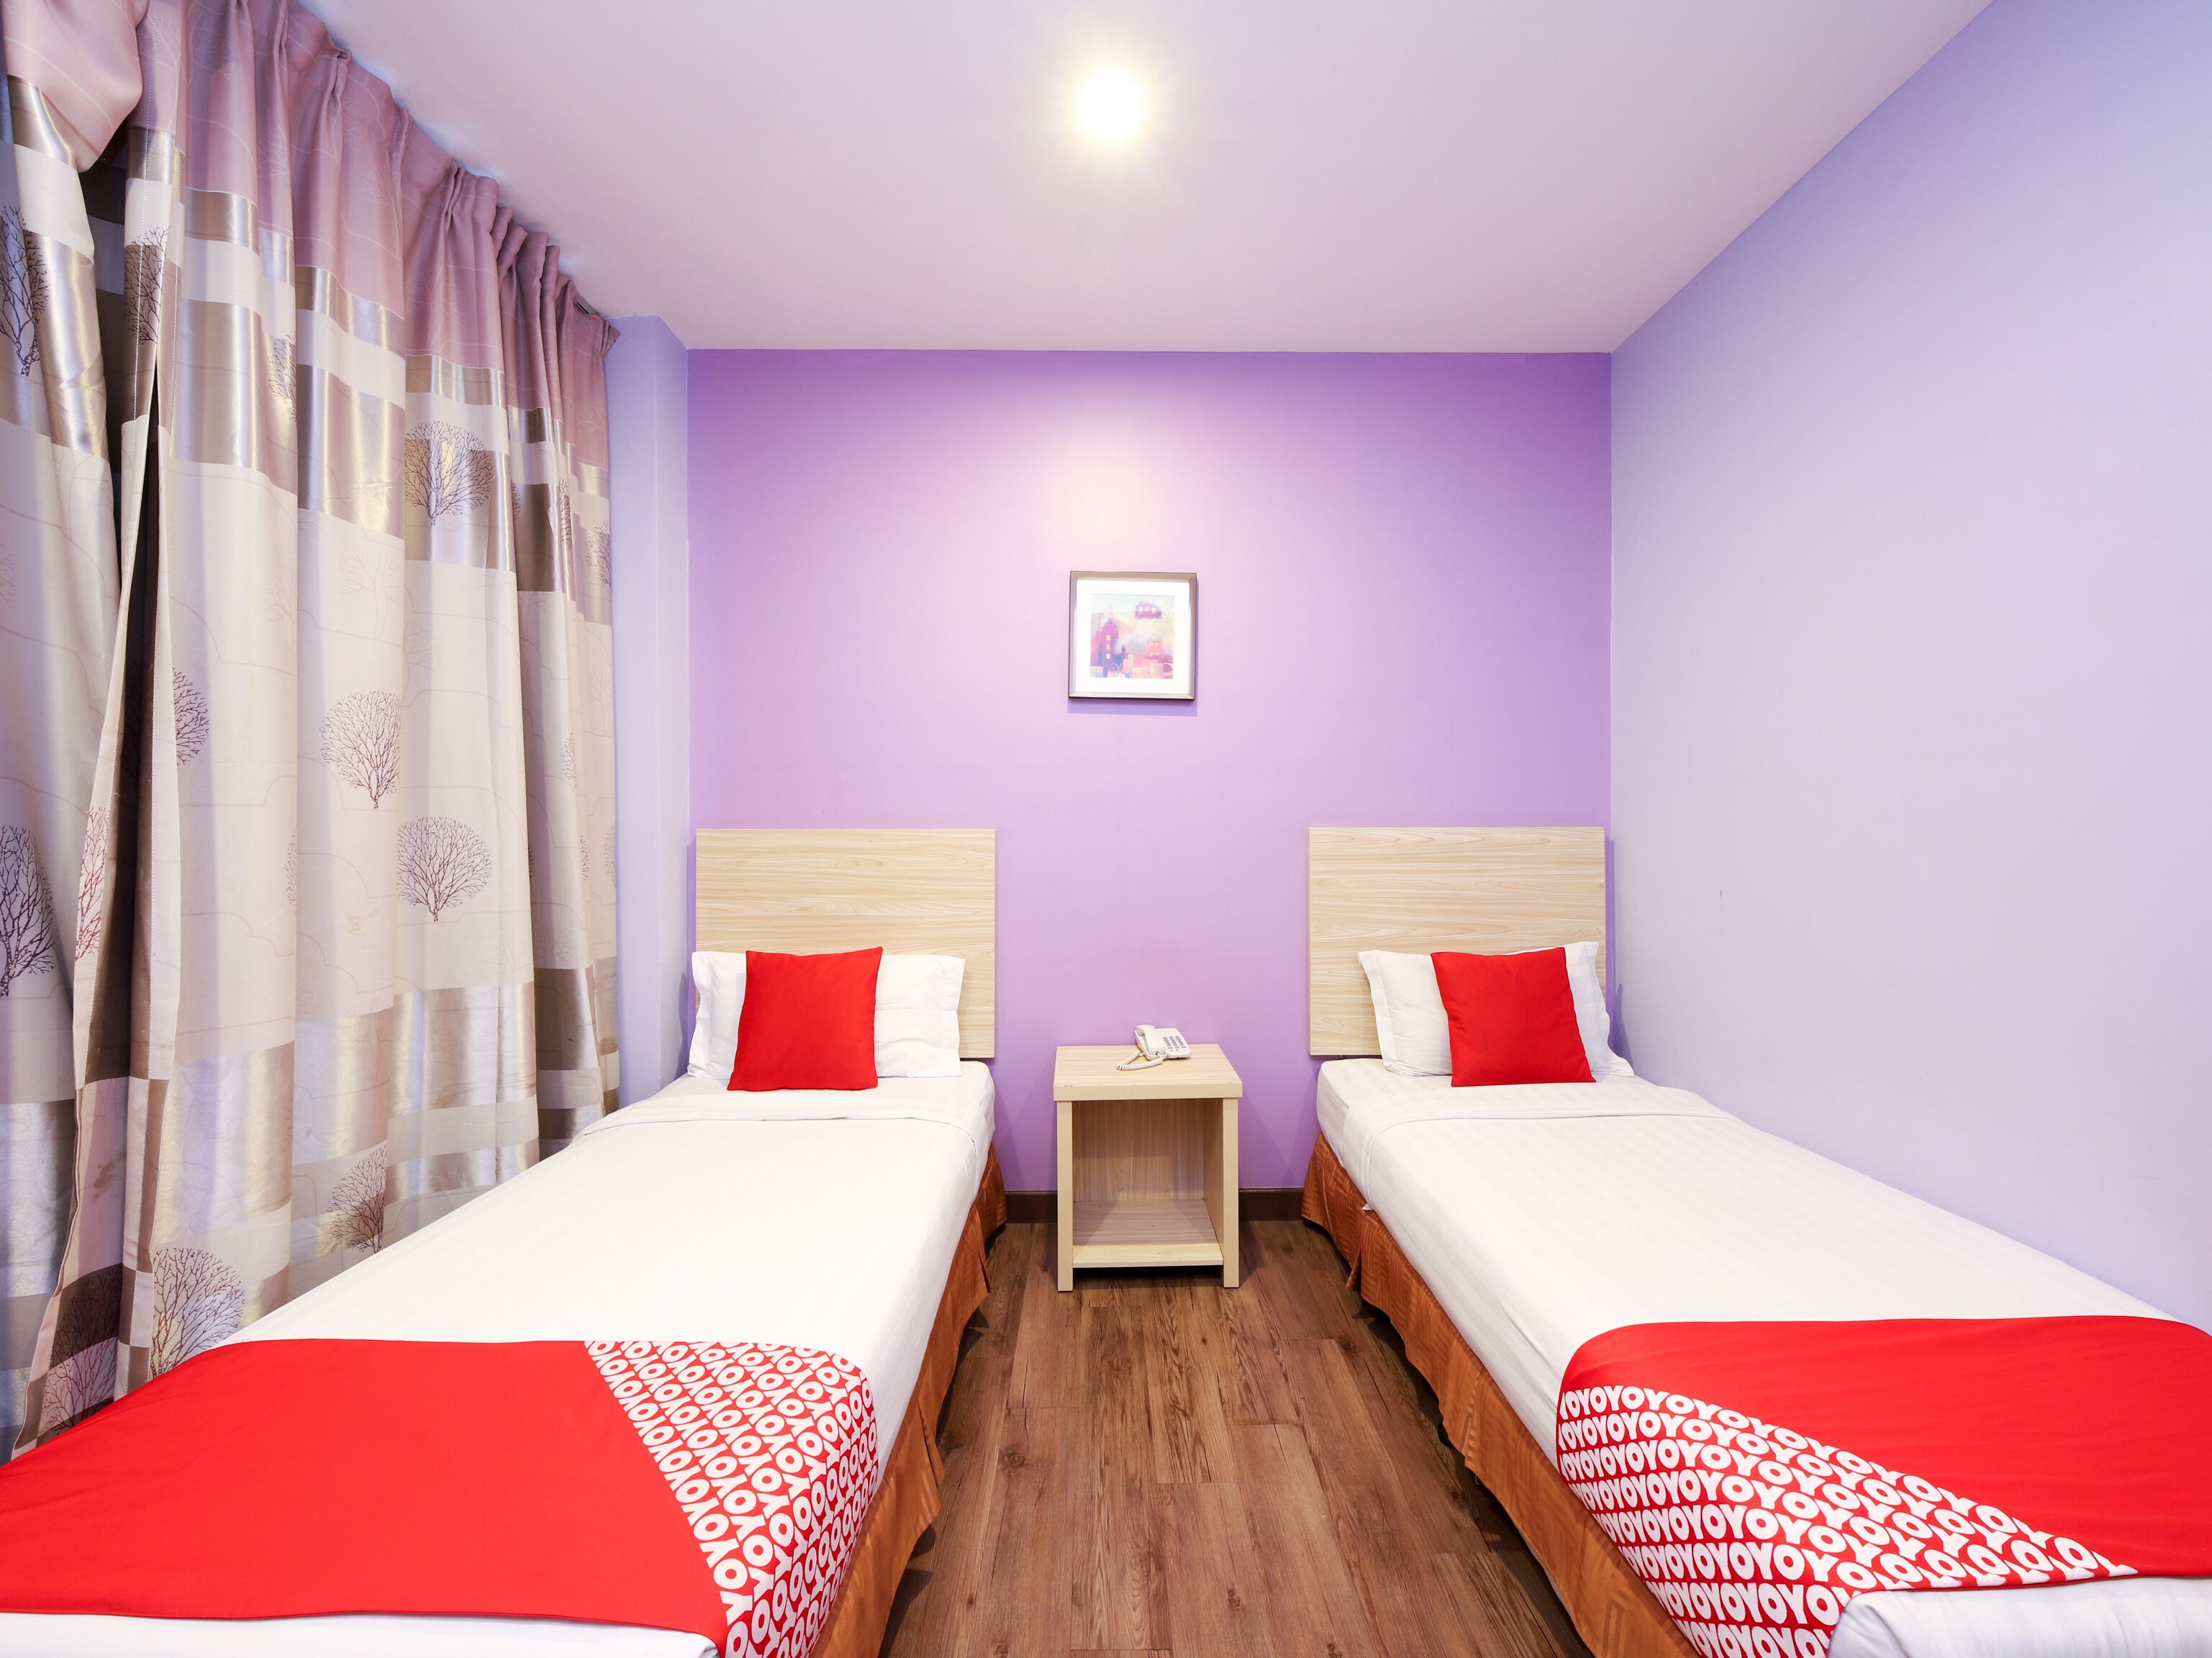 YP Boutique Hotel by OYO Rooms